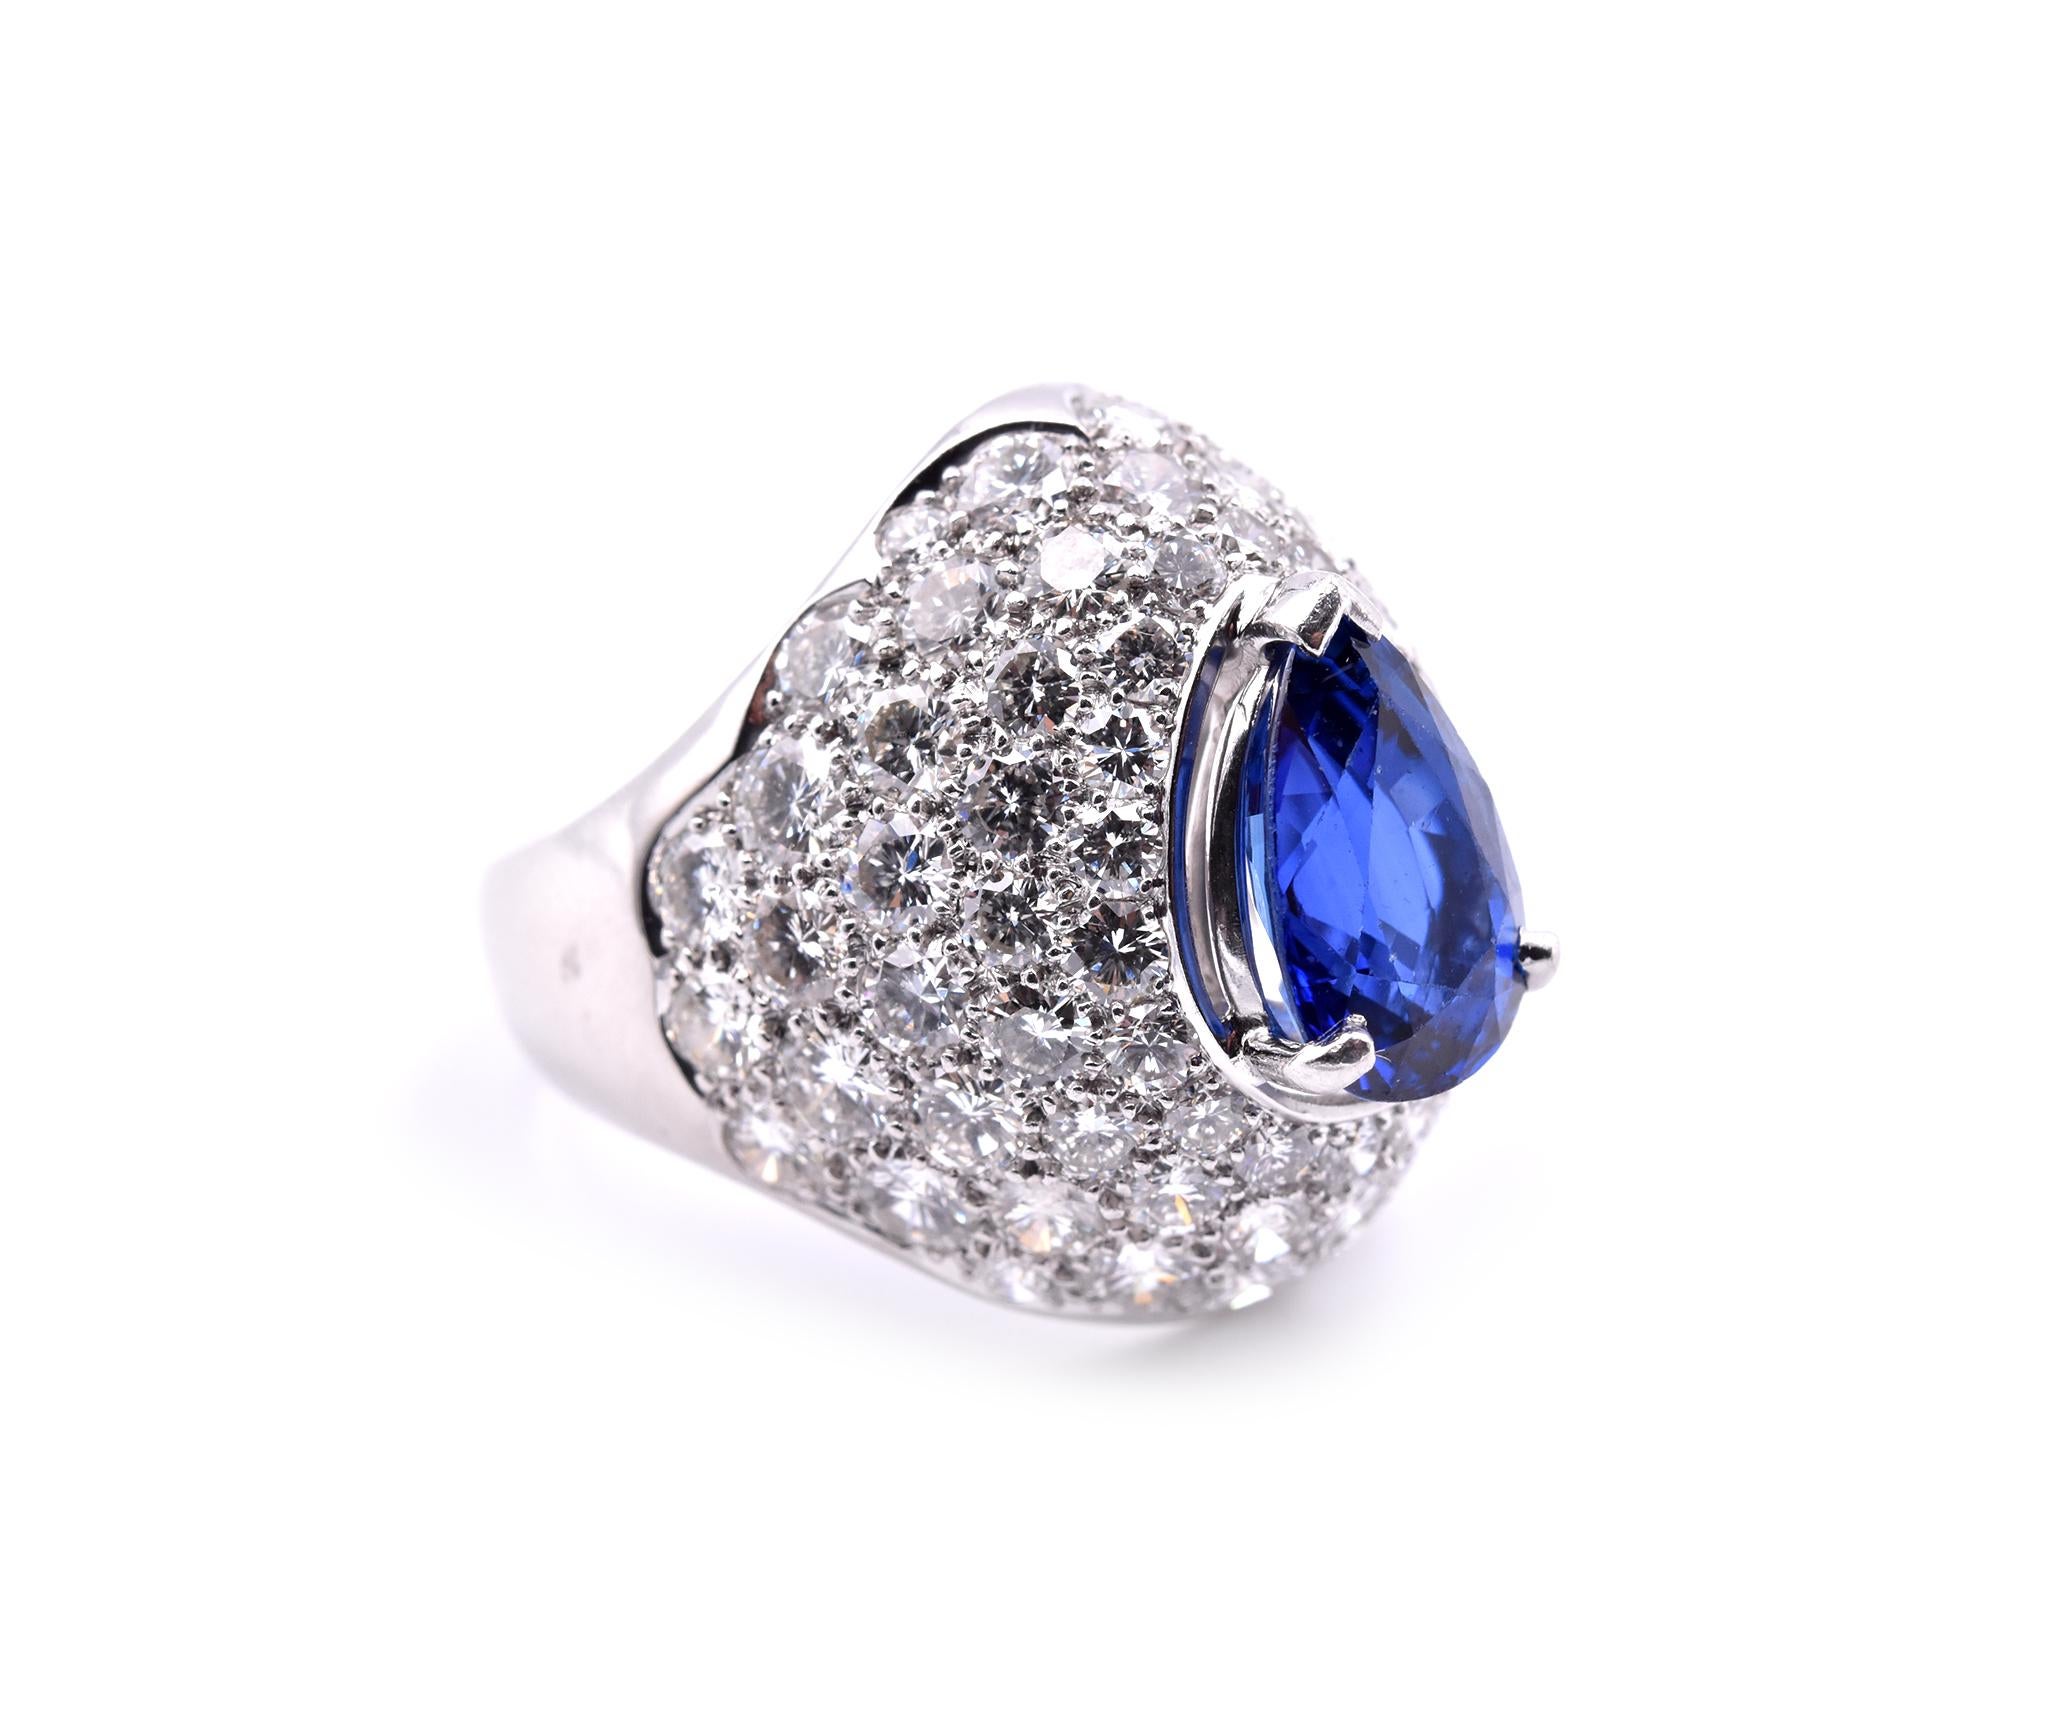 Designer: custom design
Material: platinum
Sapphire: pear cut= 3.25ct
Diamonds: 70 round brilliant cut= 4.56cttw
Color: G
Clarity: VS
Size: 6 ½ (please allow two additional shipping days for sizing requests)
Dimensions: ring is approximately 23.00mm